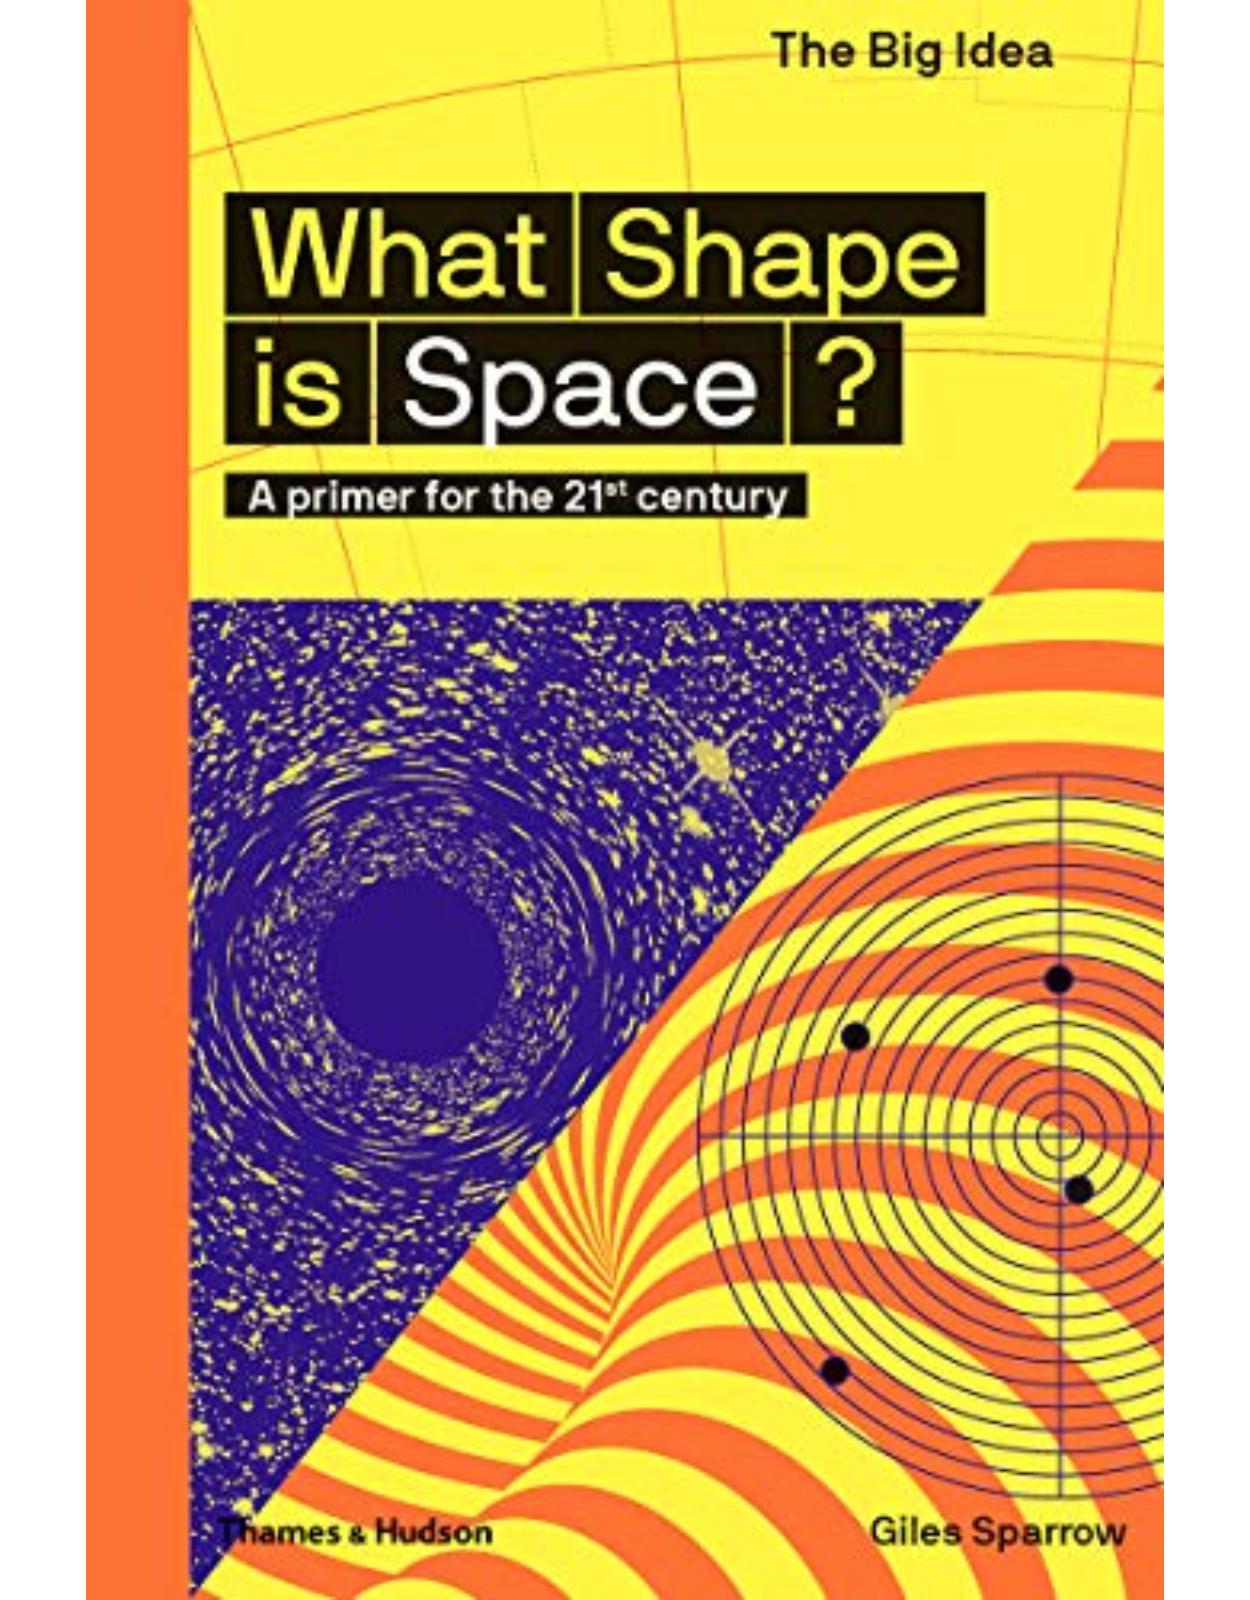 What Shape is Space?